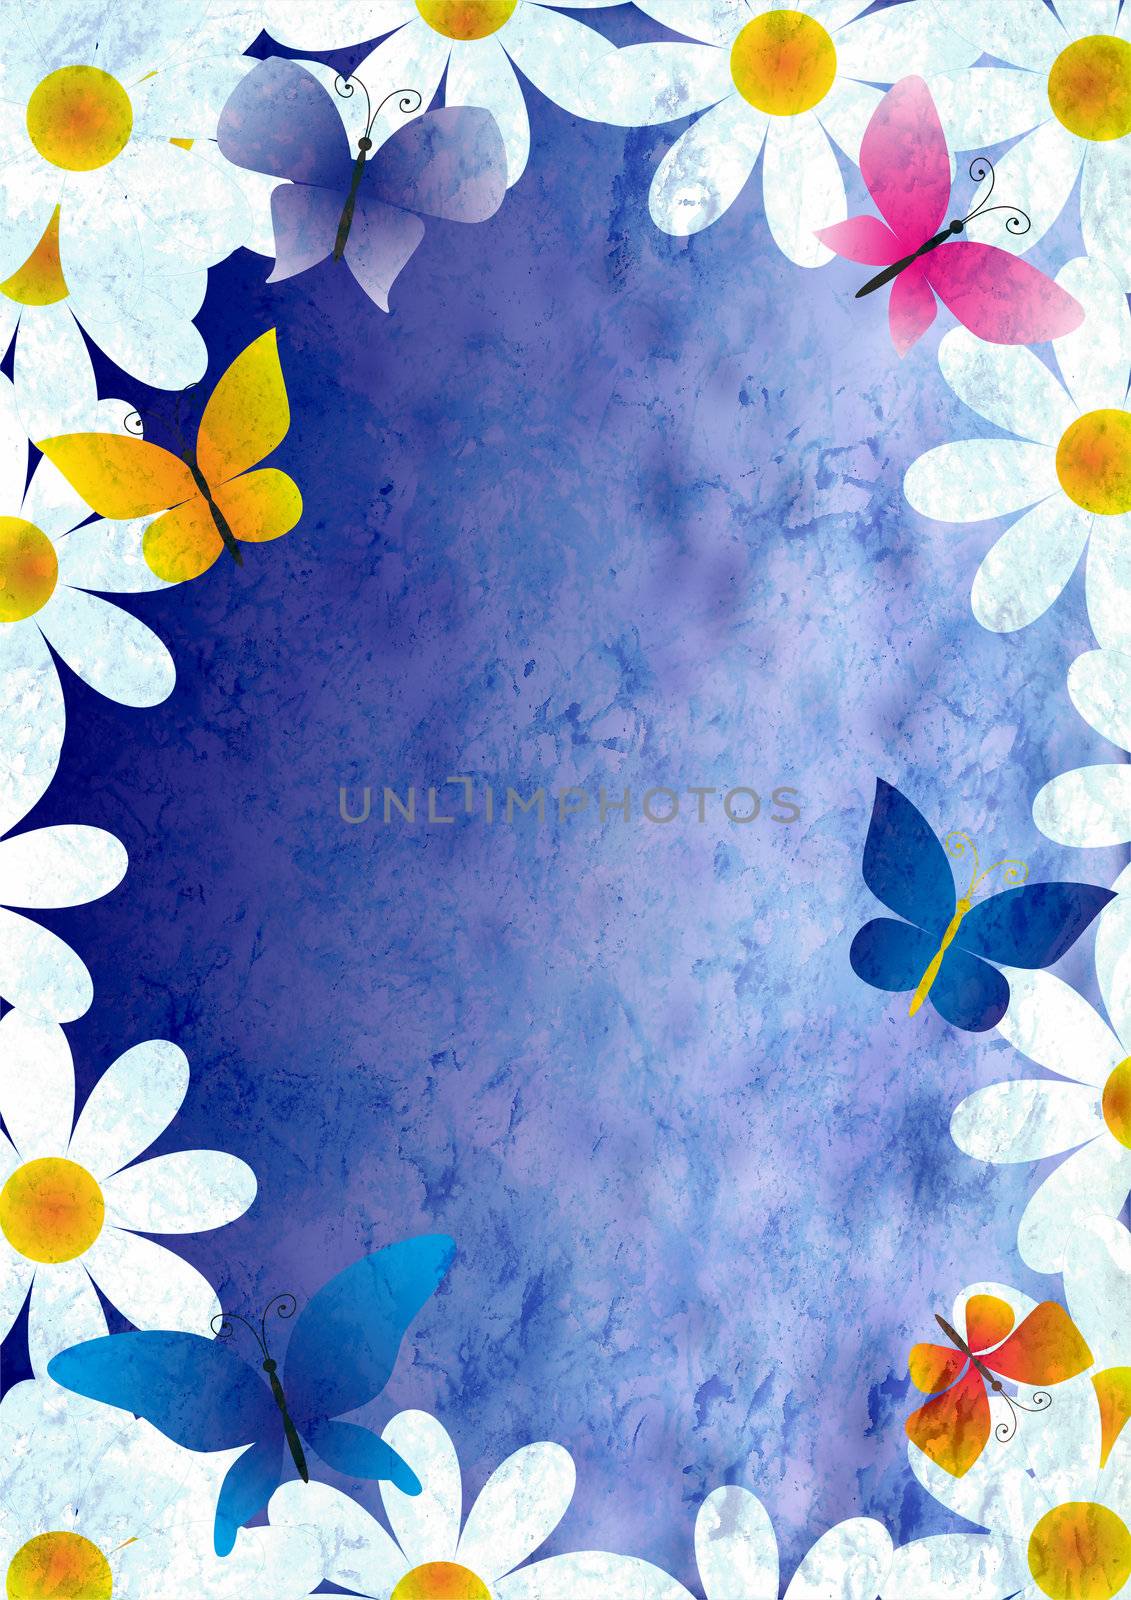 flowers and butterflies grunge style spring background vintage p by CherJu